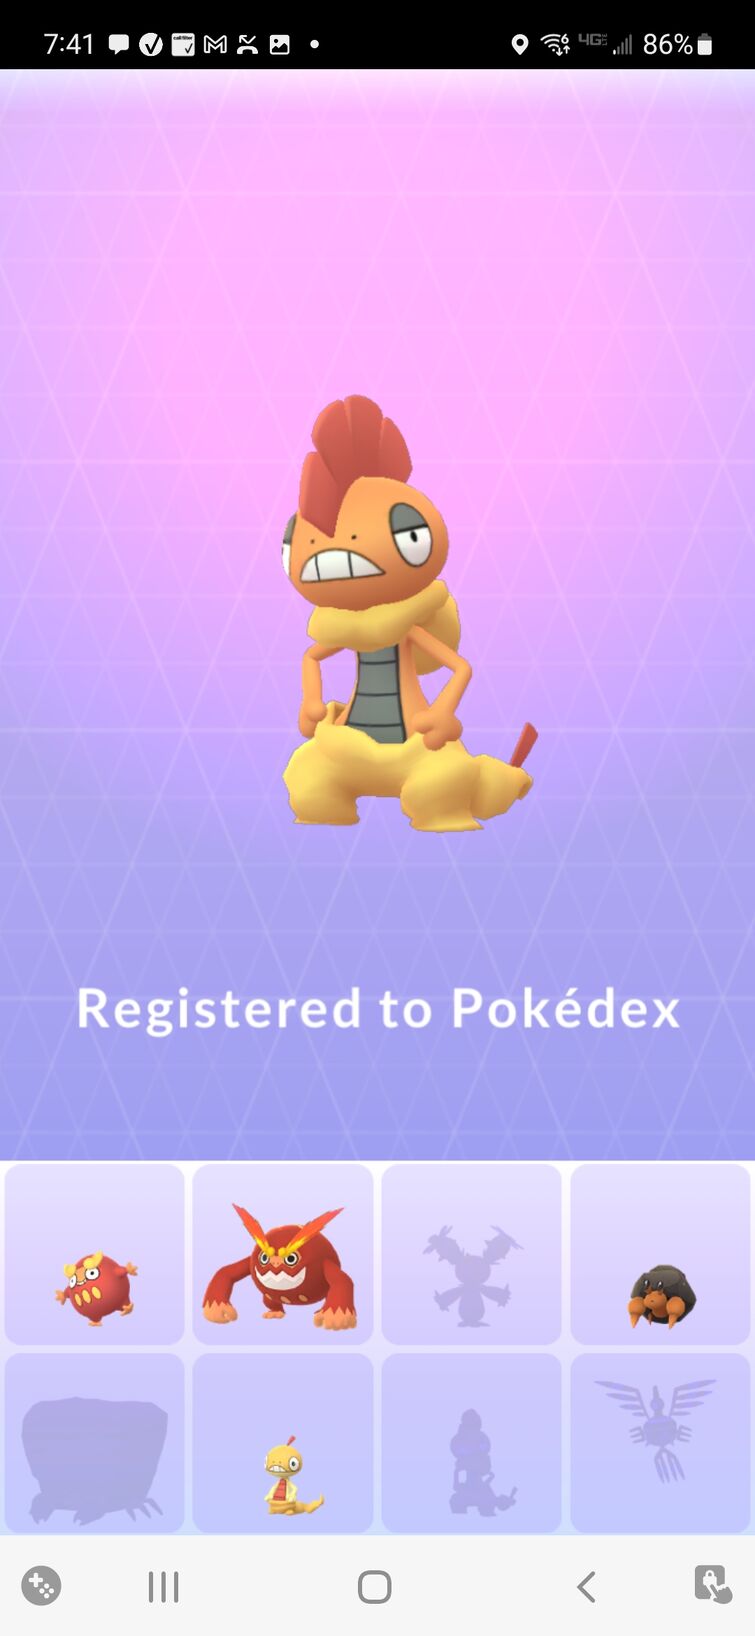 How to get Shiny Scraggy and Shiny Scrafty in Pokemon GO?